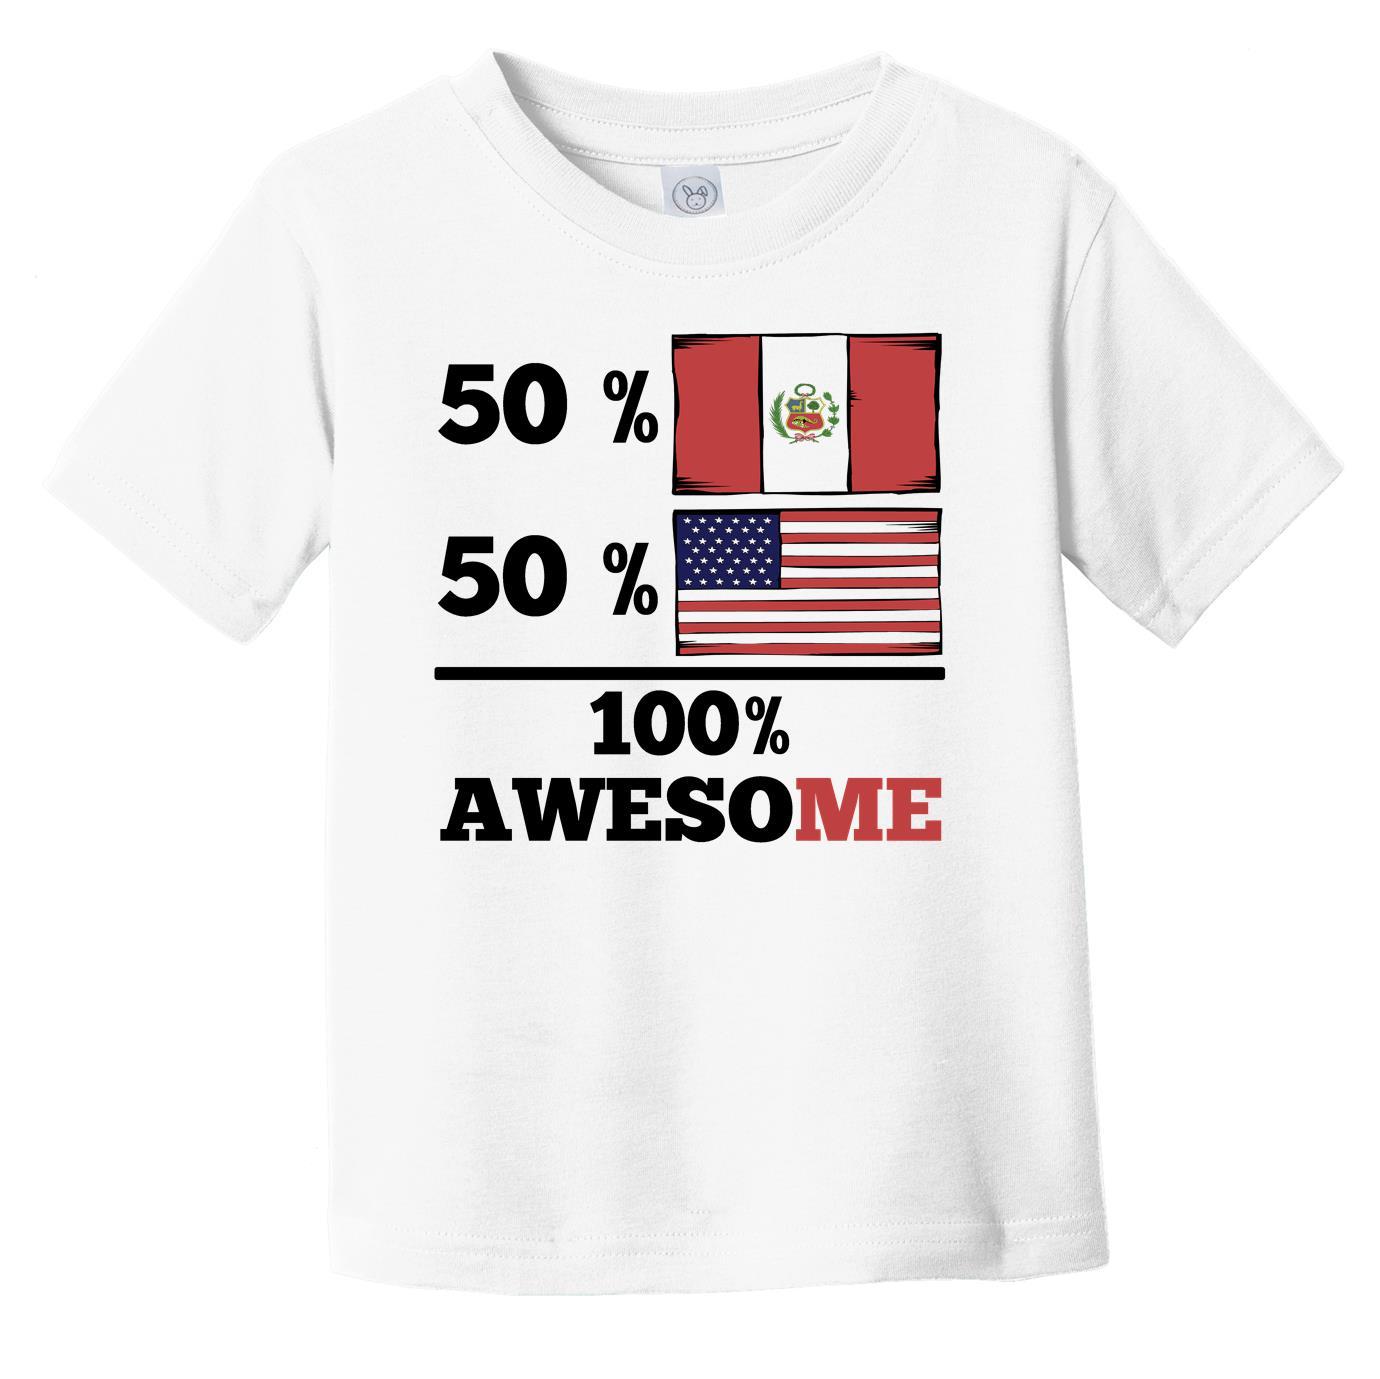 50% Peruvian 50% American 100% Awesome Infant Toddler T-Shirt